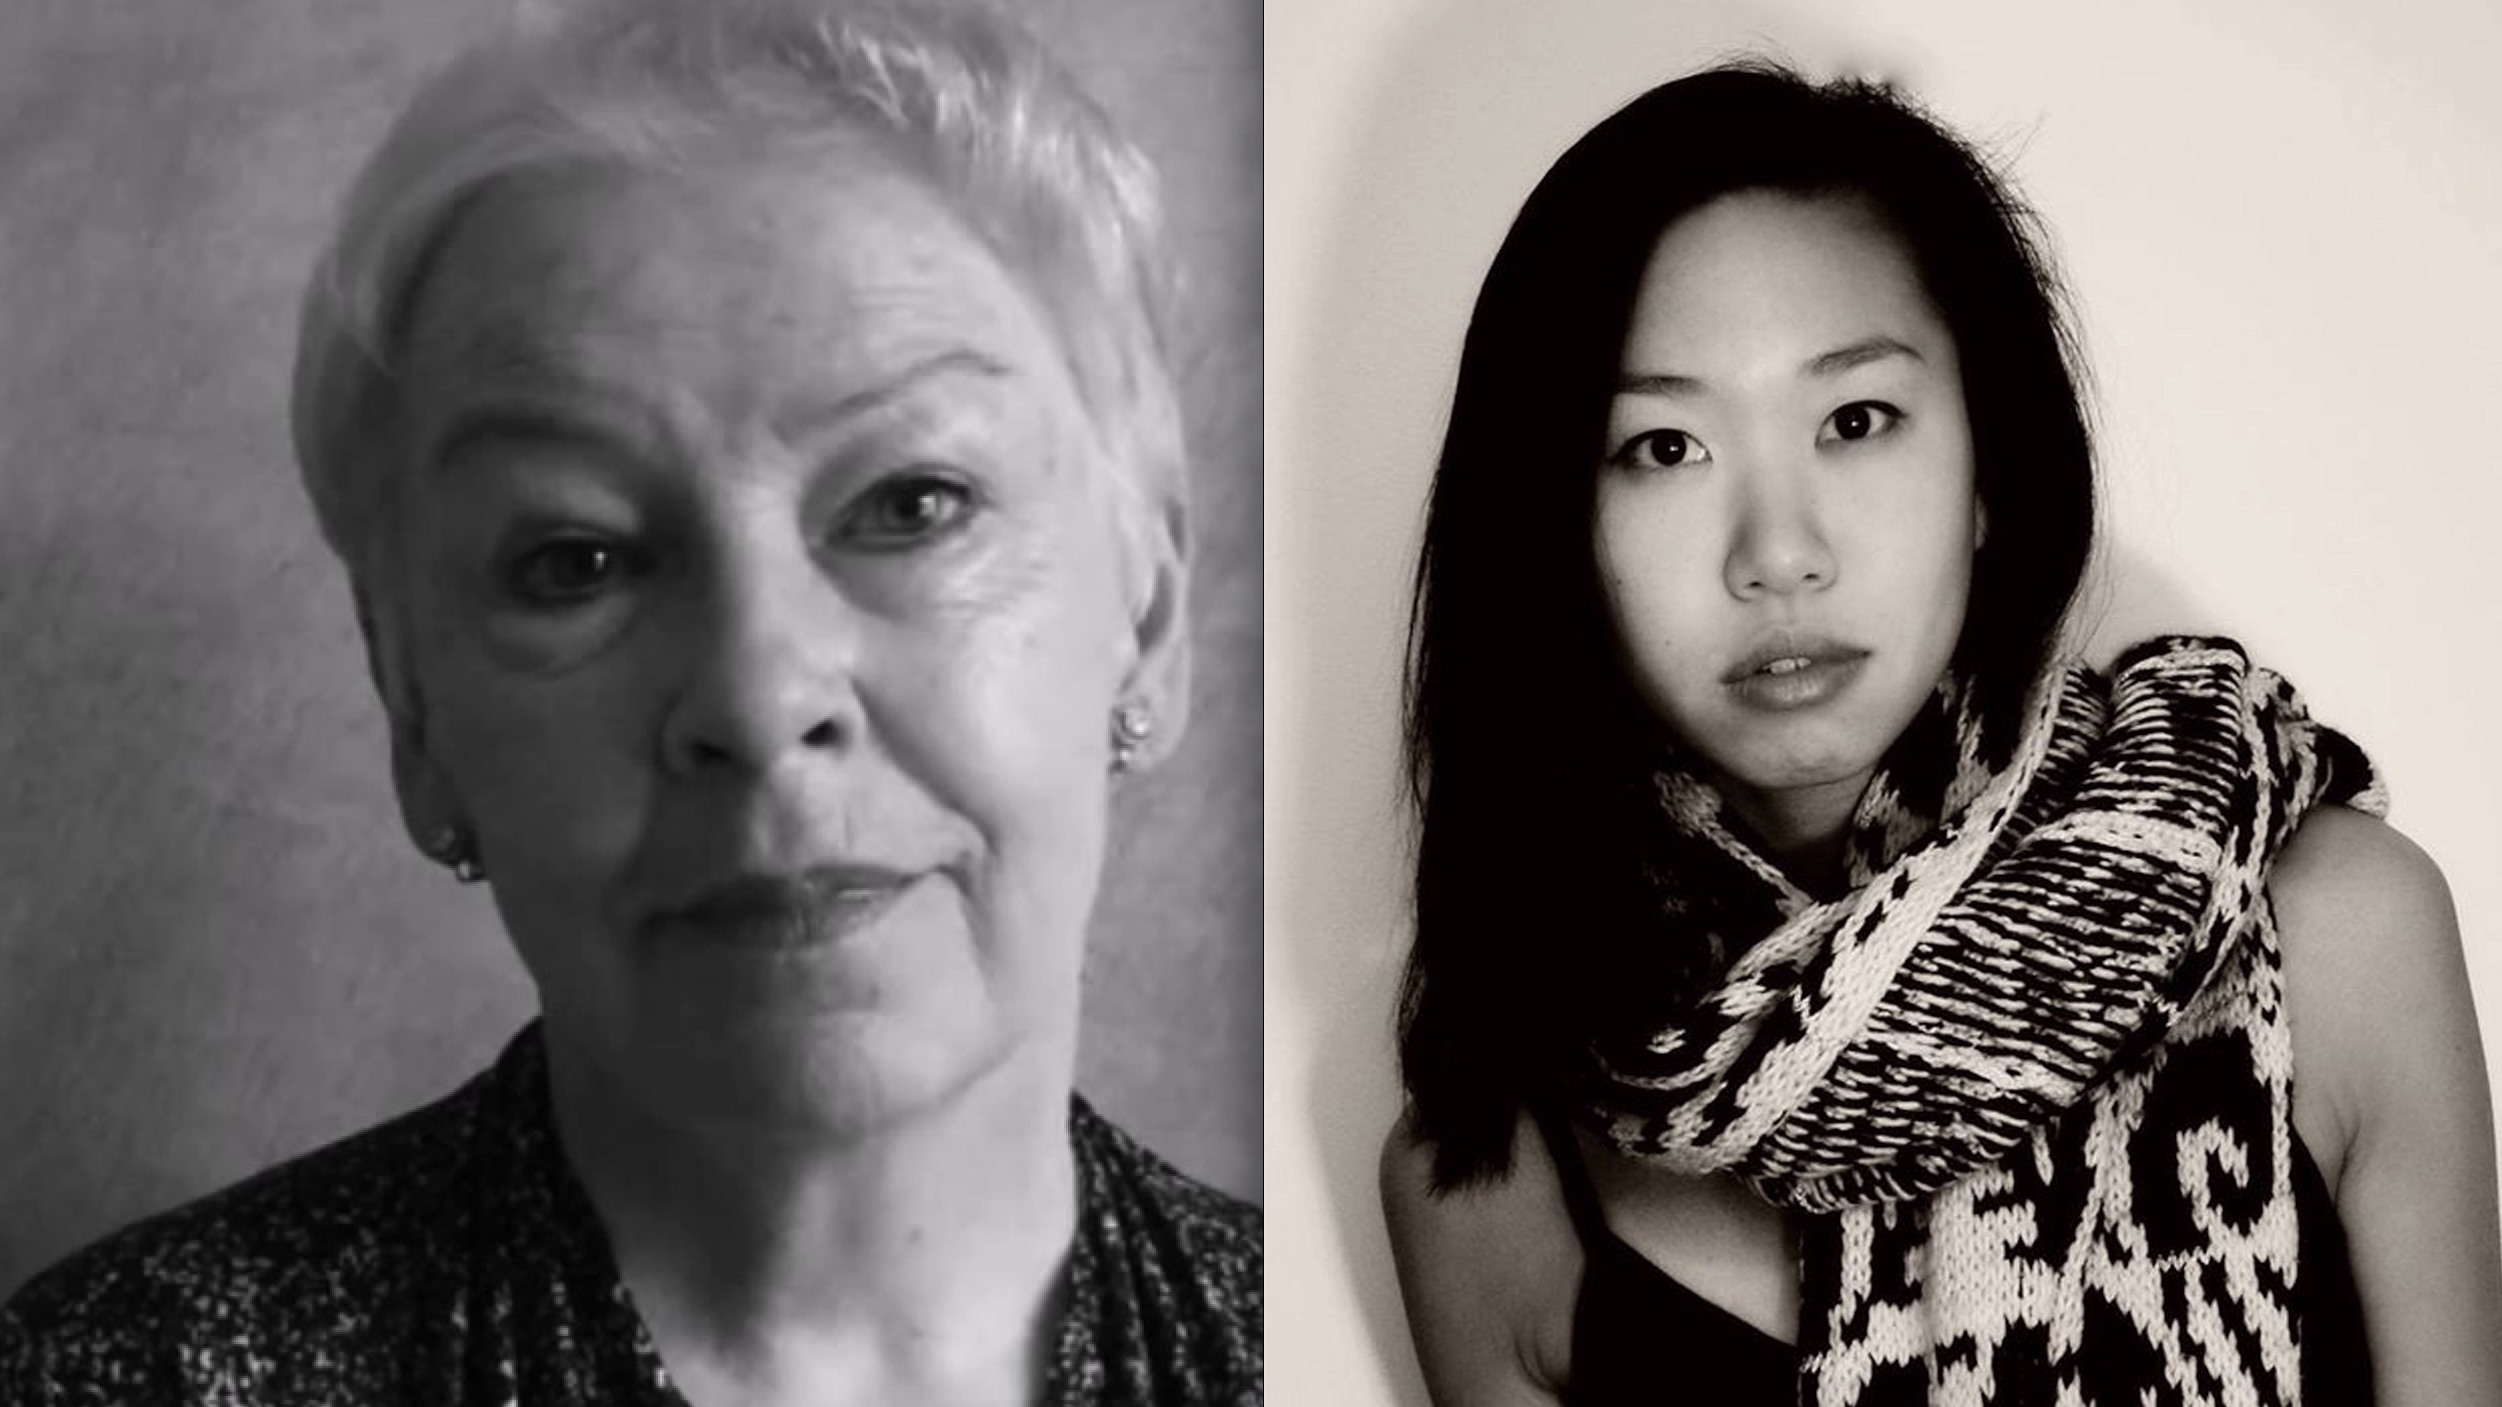 black and white portrait photos of poets Denise Riley and Jennifer Soong